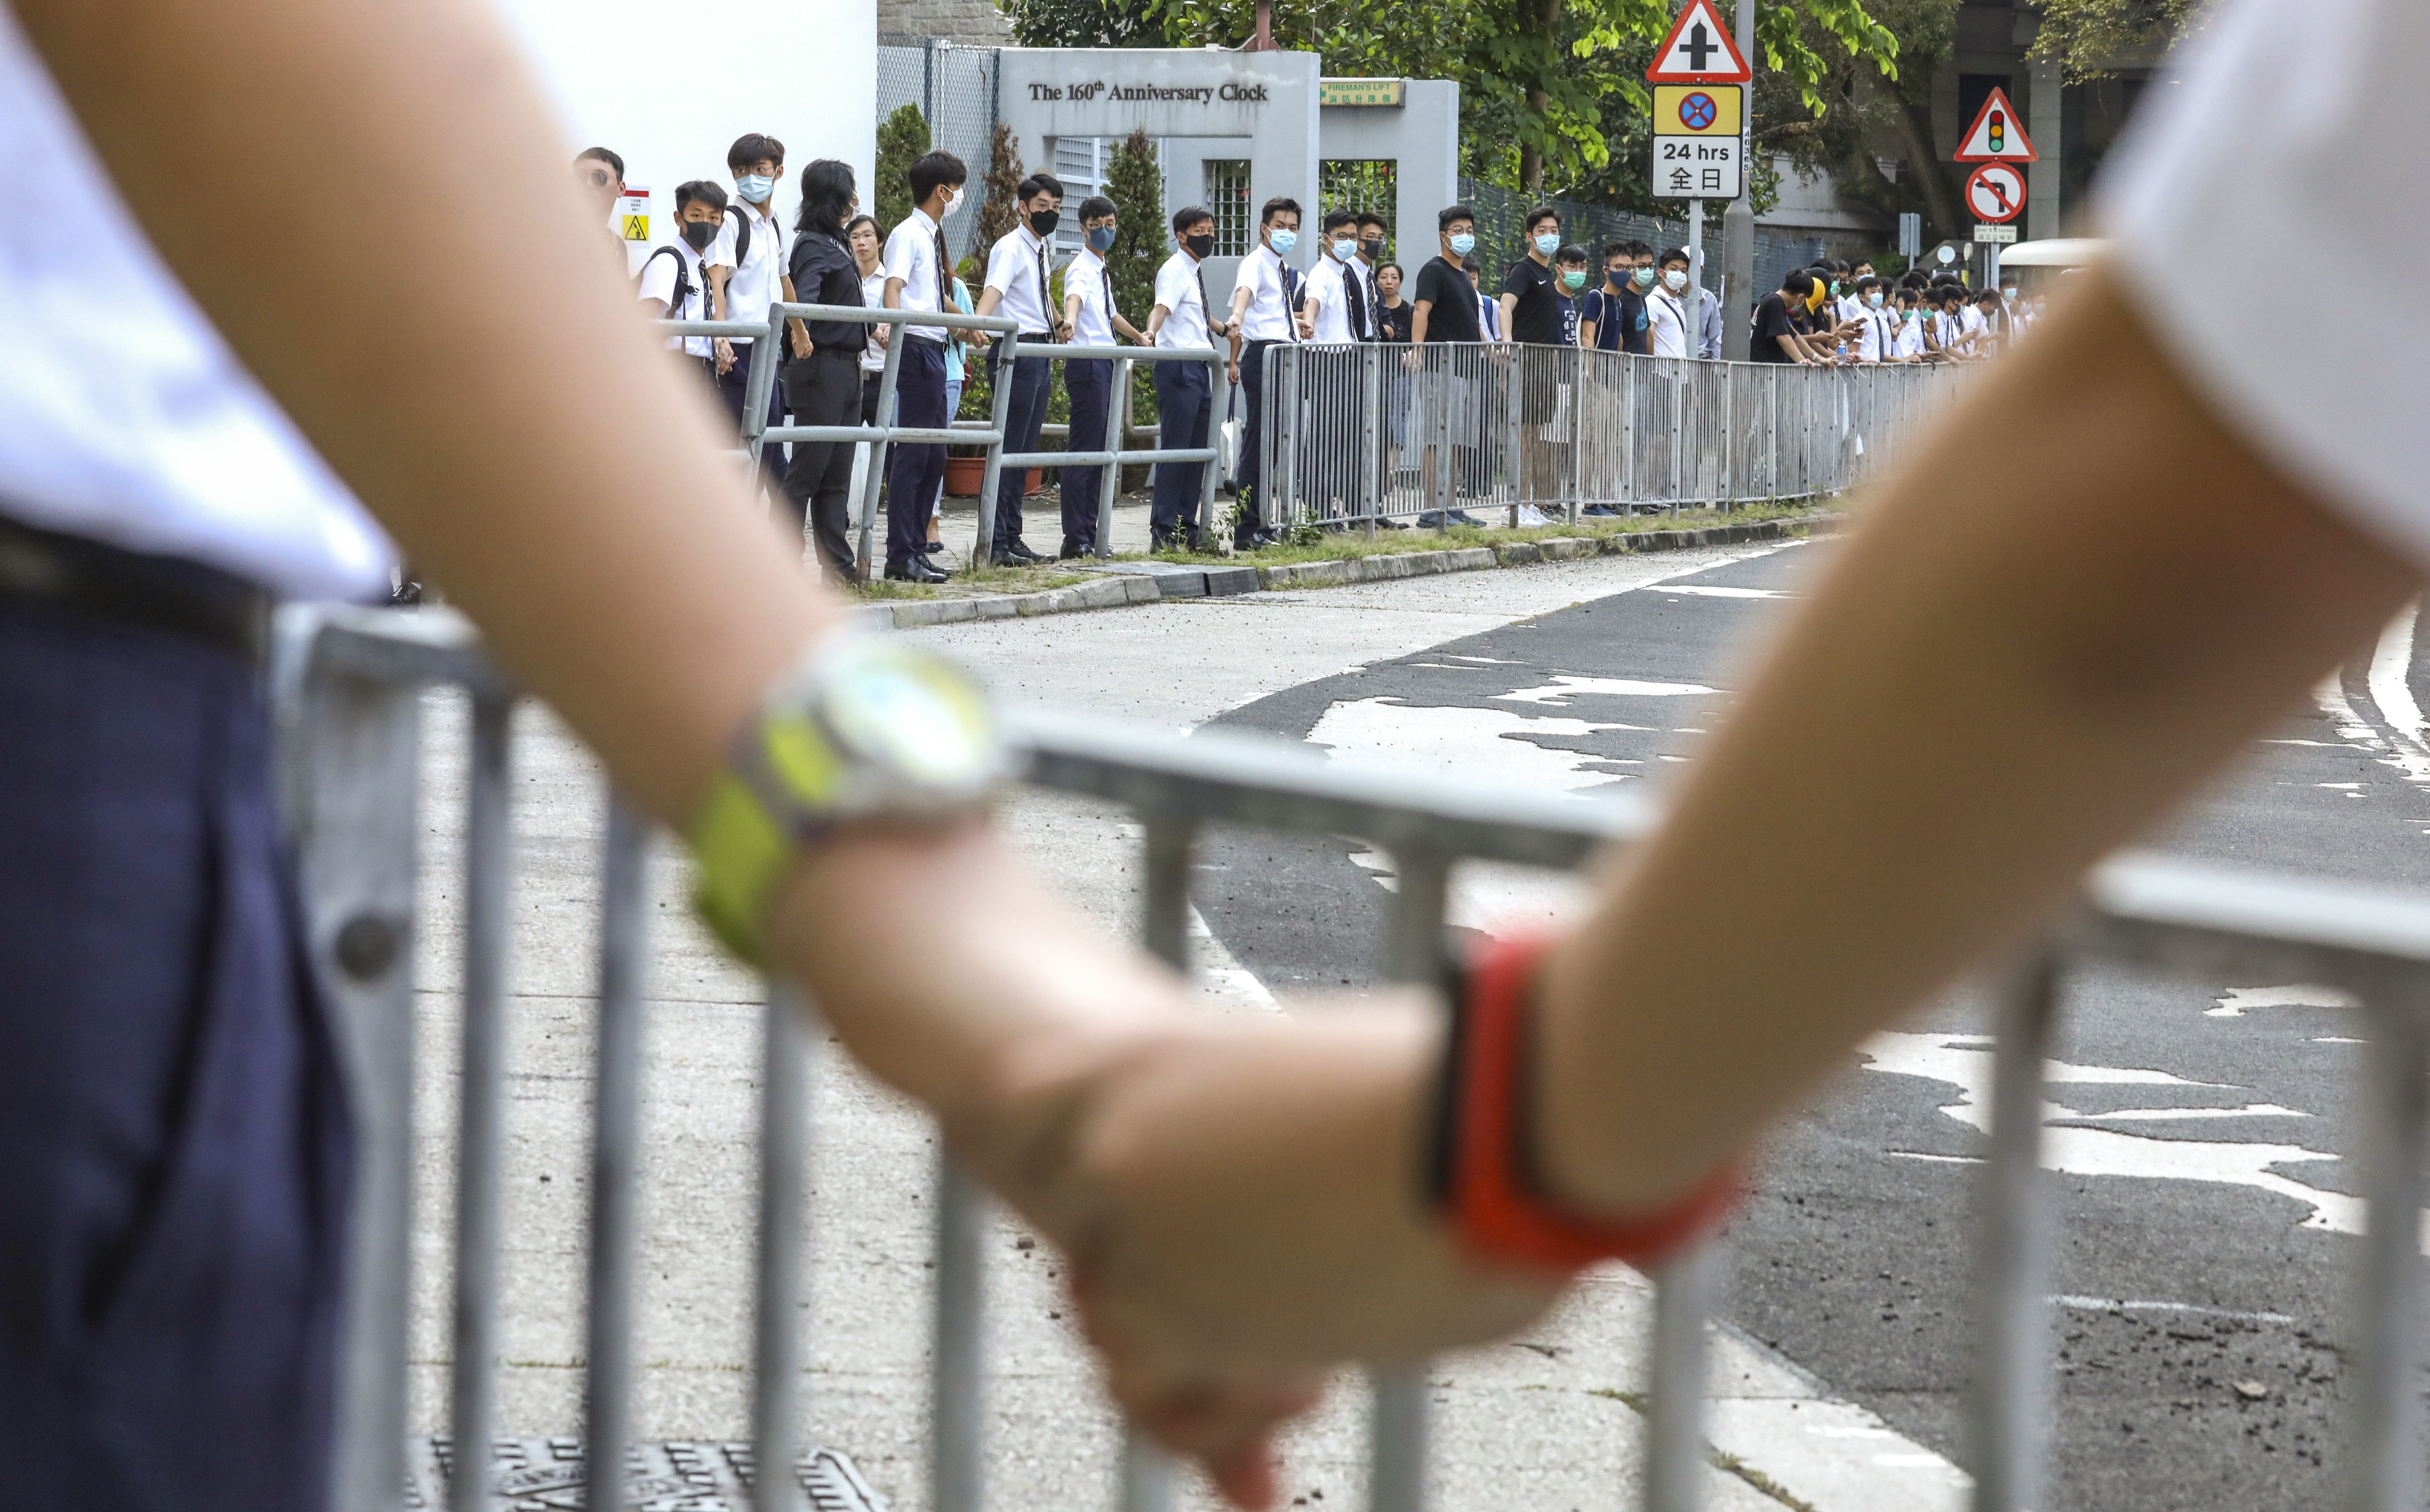 Pupils from schools in Mid-Levels form a human chain as part of last year’s anti-government protests. Photo: Nora Tam